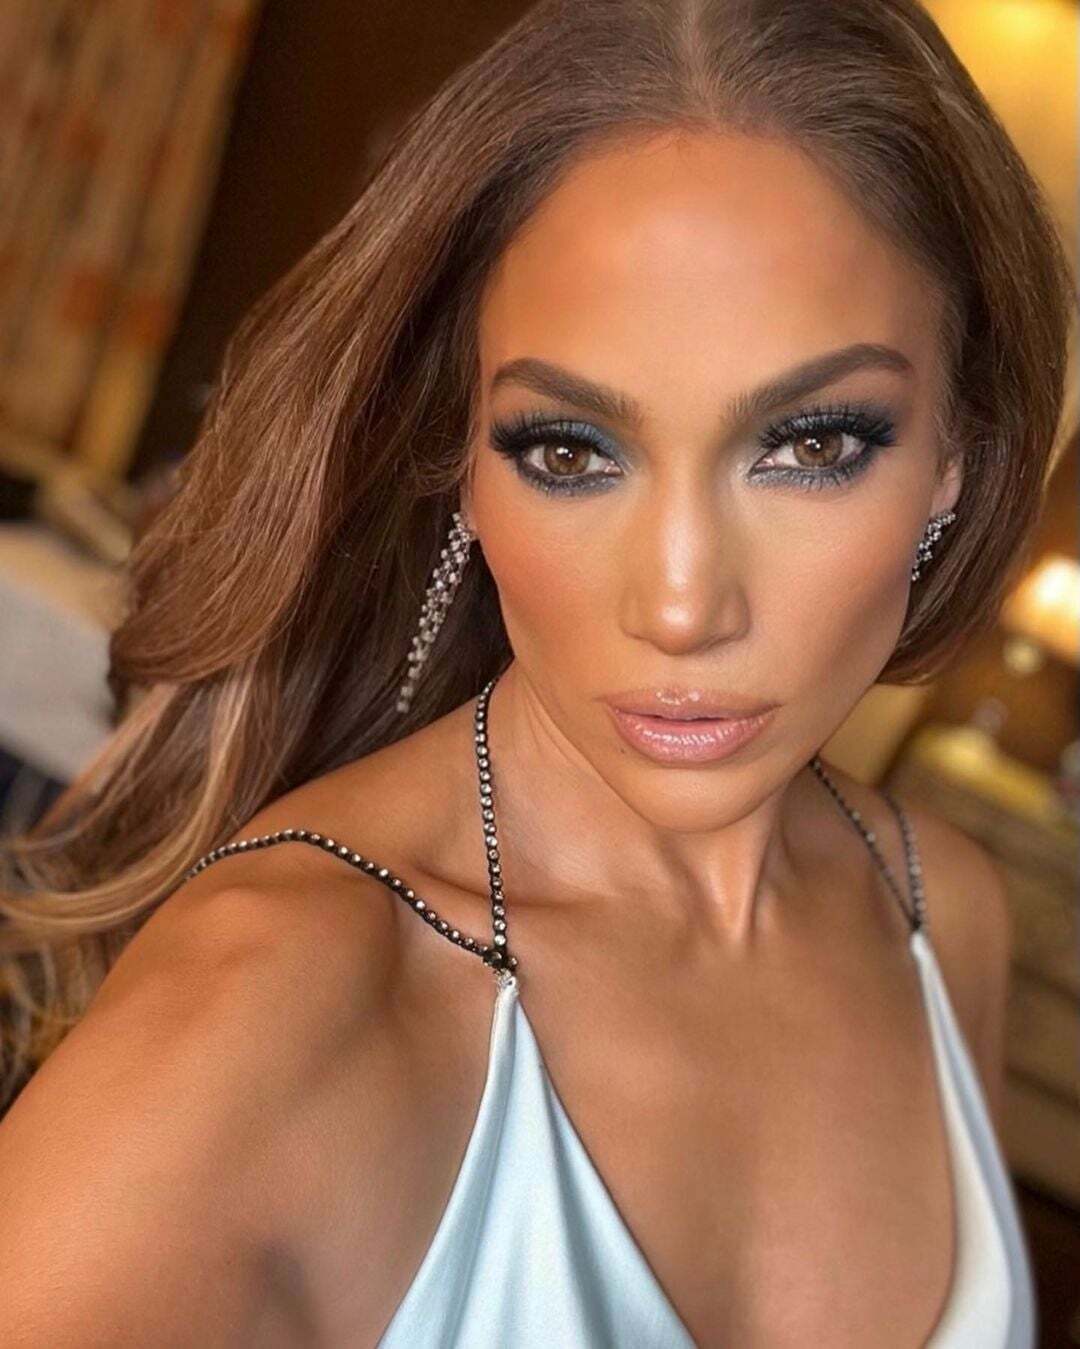 Jennifer Lopez in this makeup looks like a MILF begging